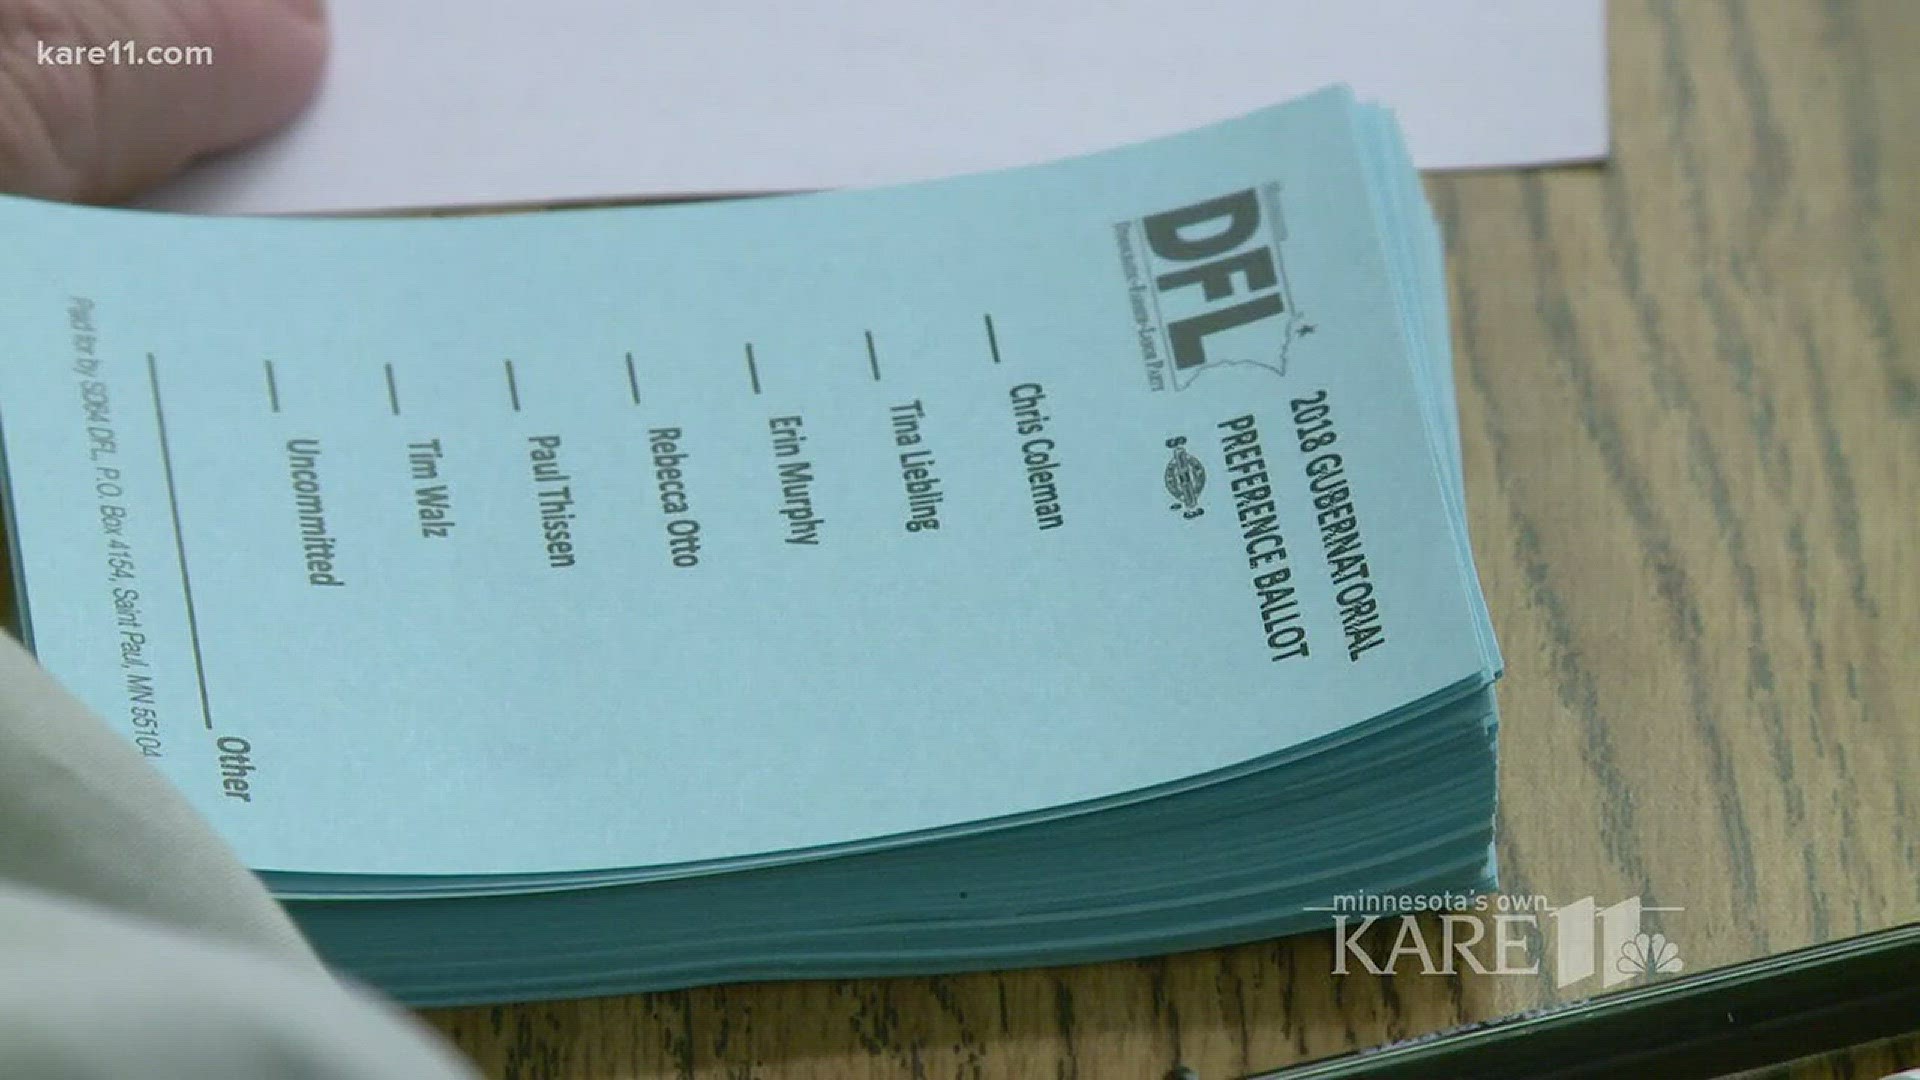 The straw poll testing of gubernatorial candidates' support was the main event of the precinct caucuses Tuesday. http://kare11.tv/2seorBk